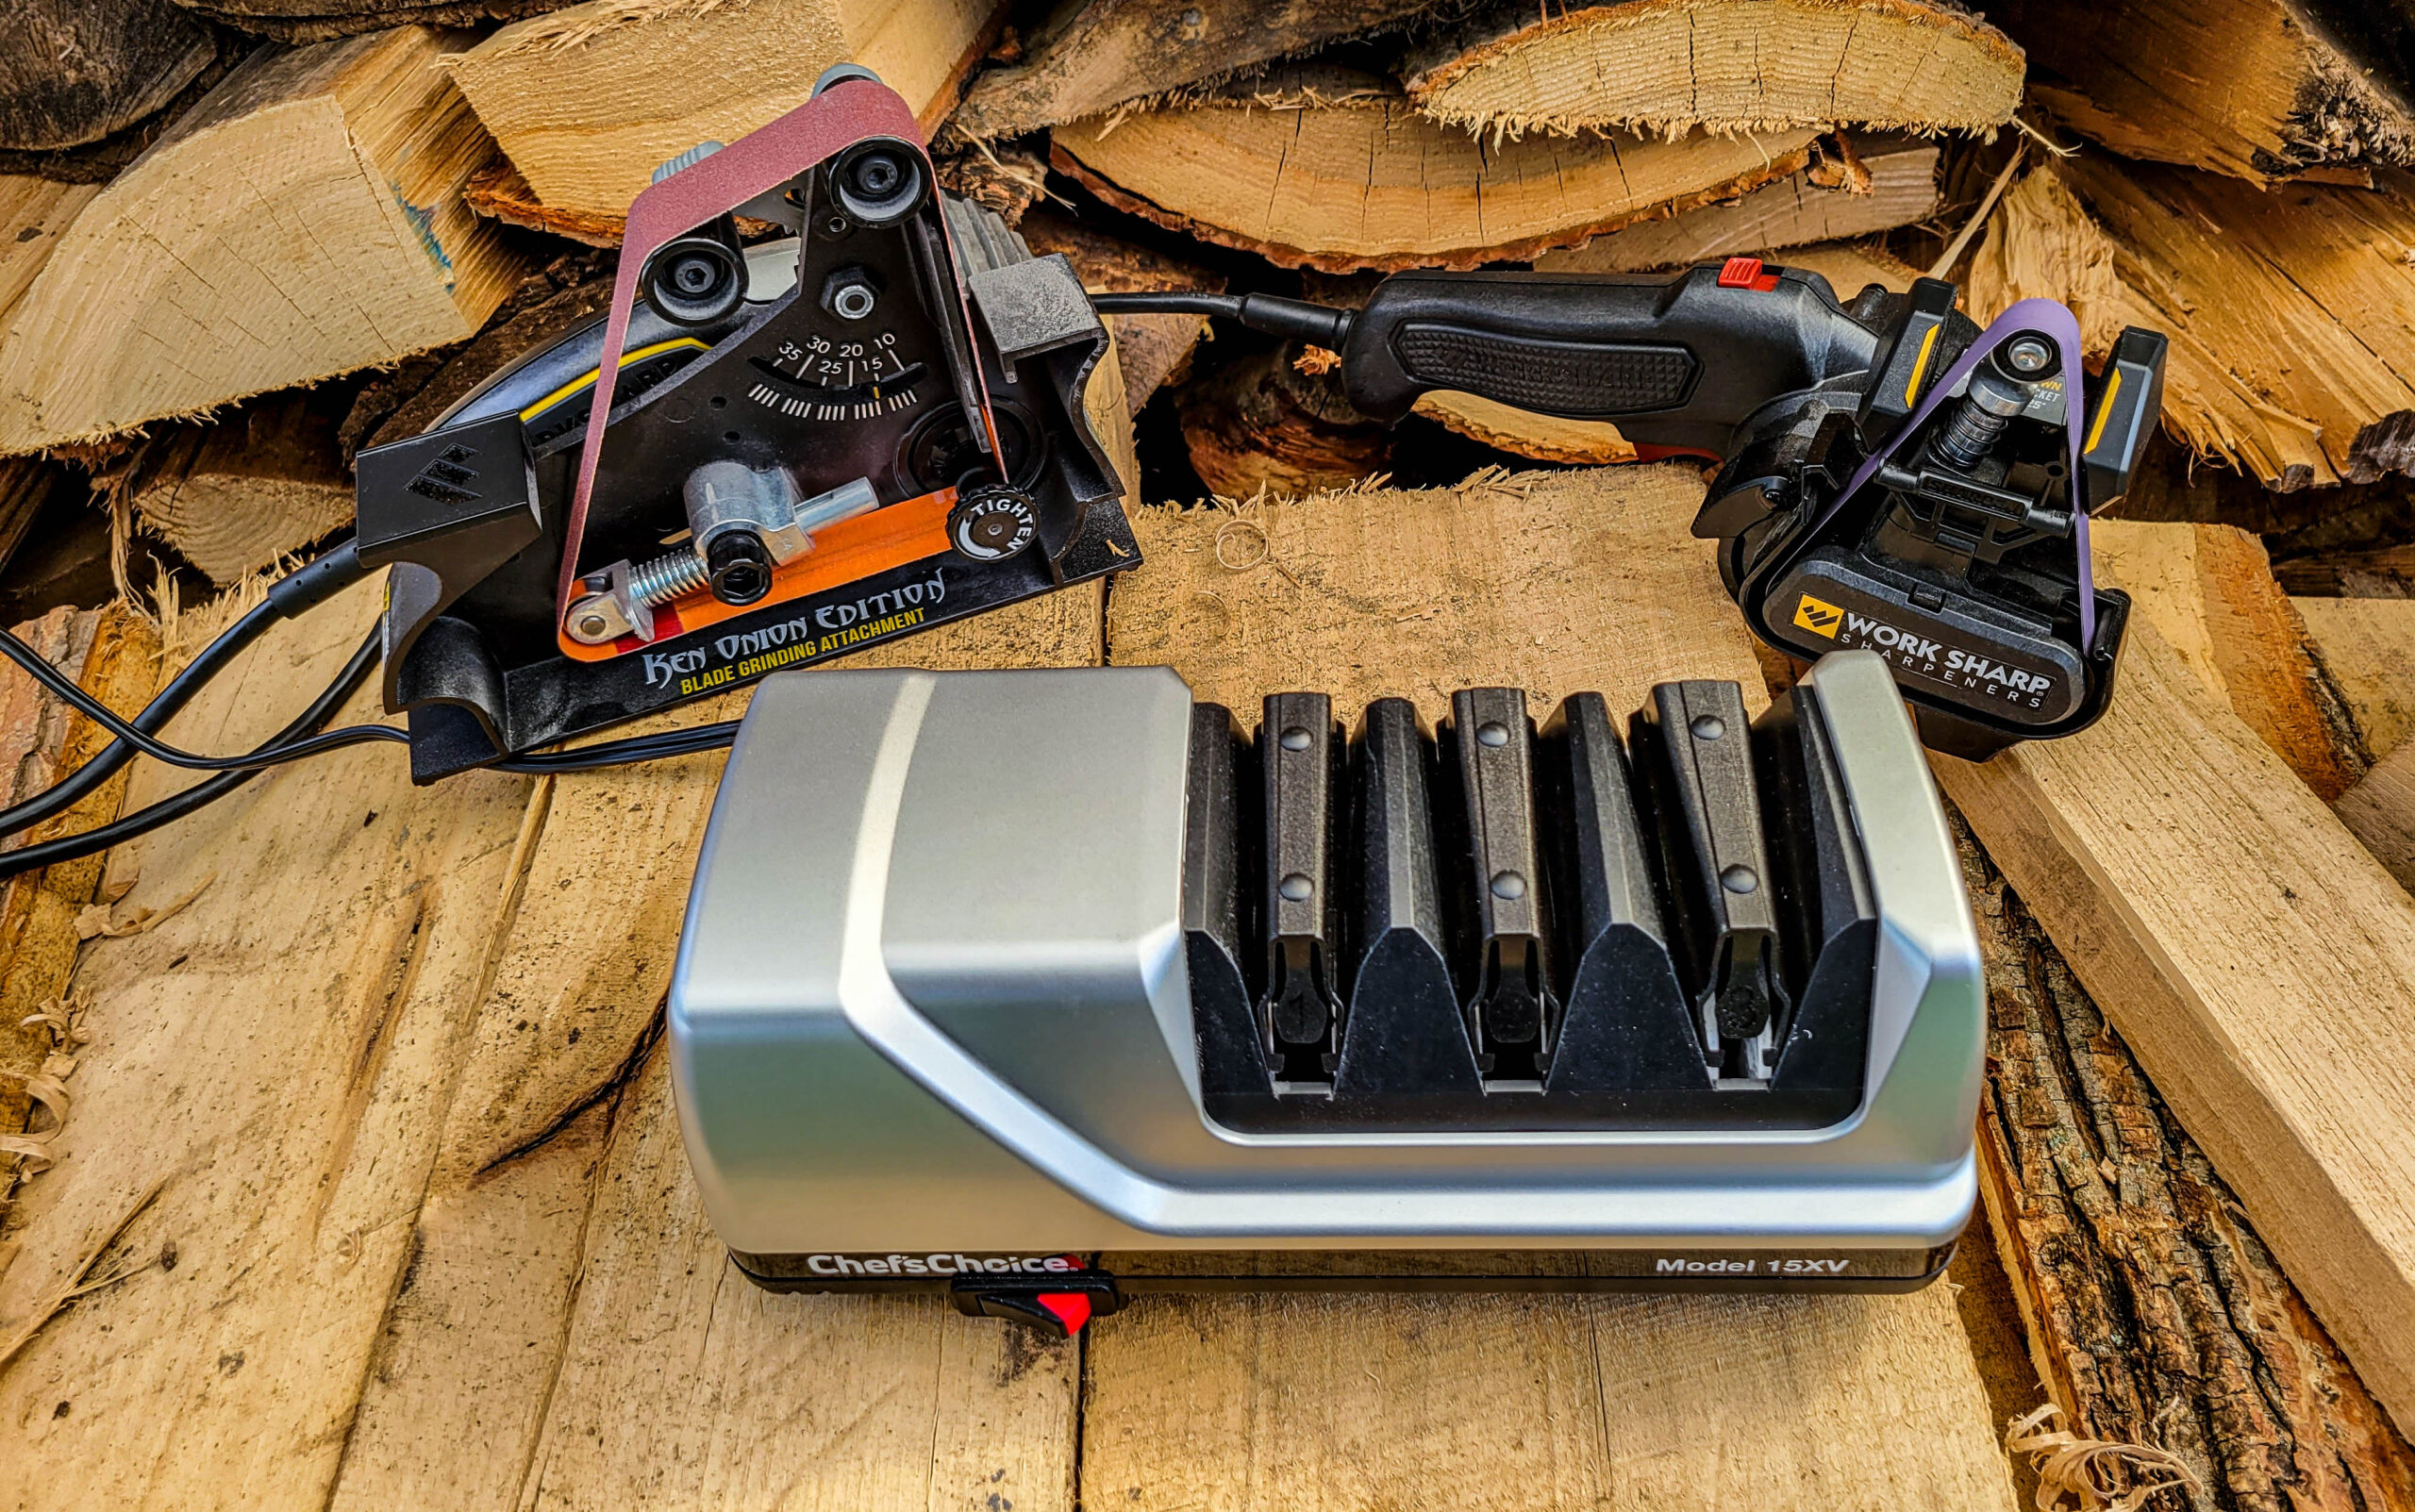 https://www.outdoorlife.com/wp-content/uploads/2023/08/18/electric-sharpeners-7-scaled.jpg